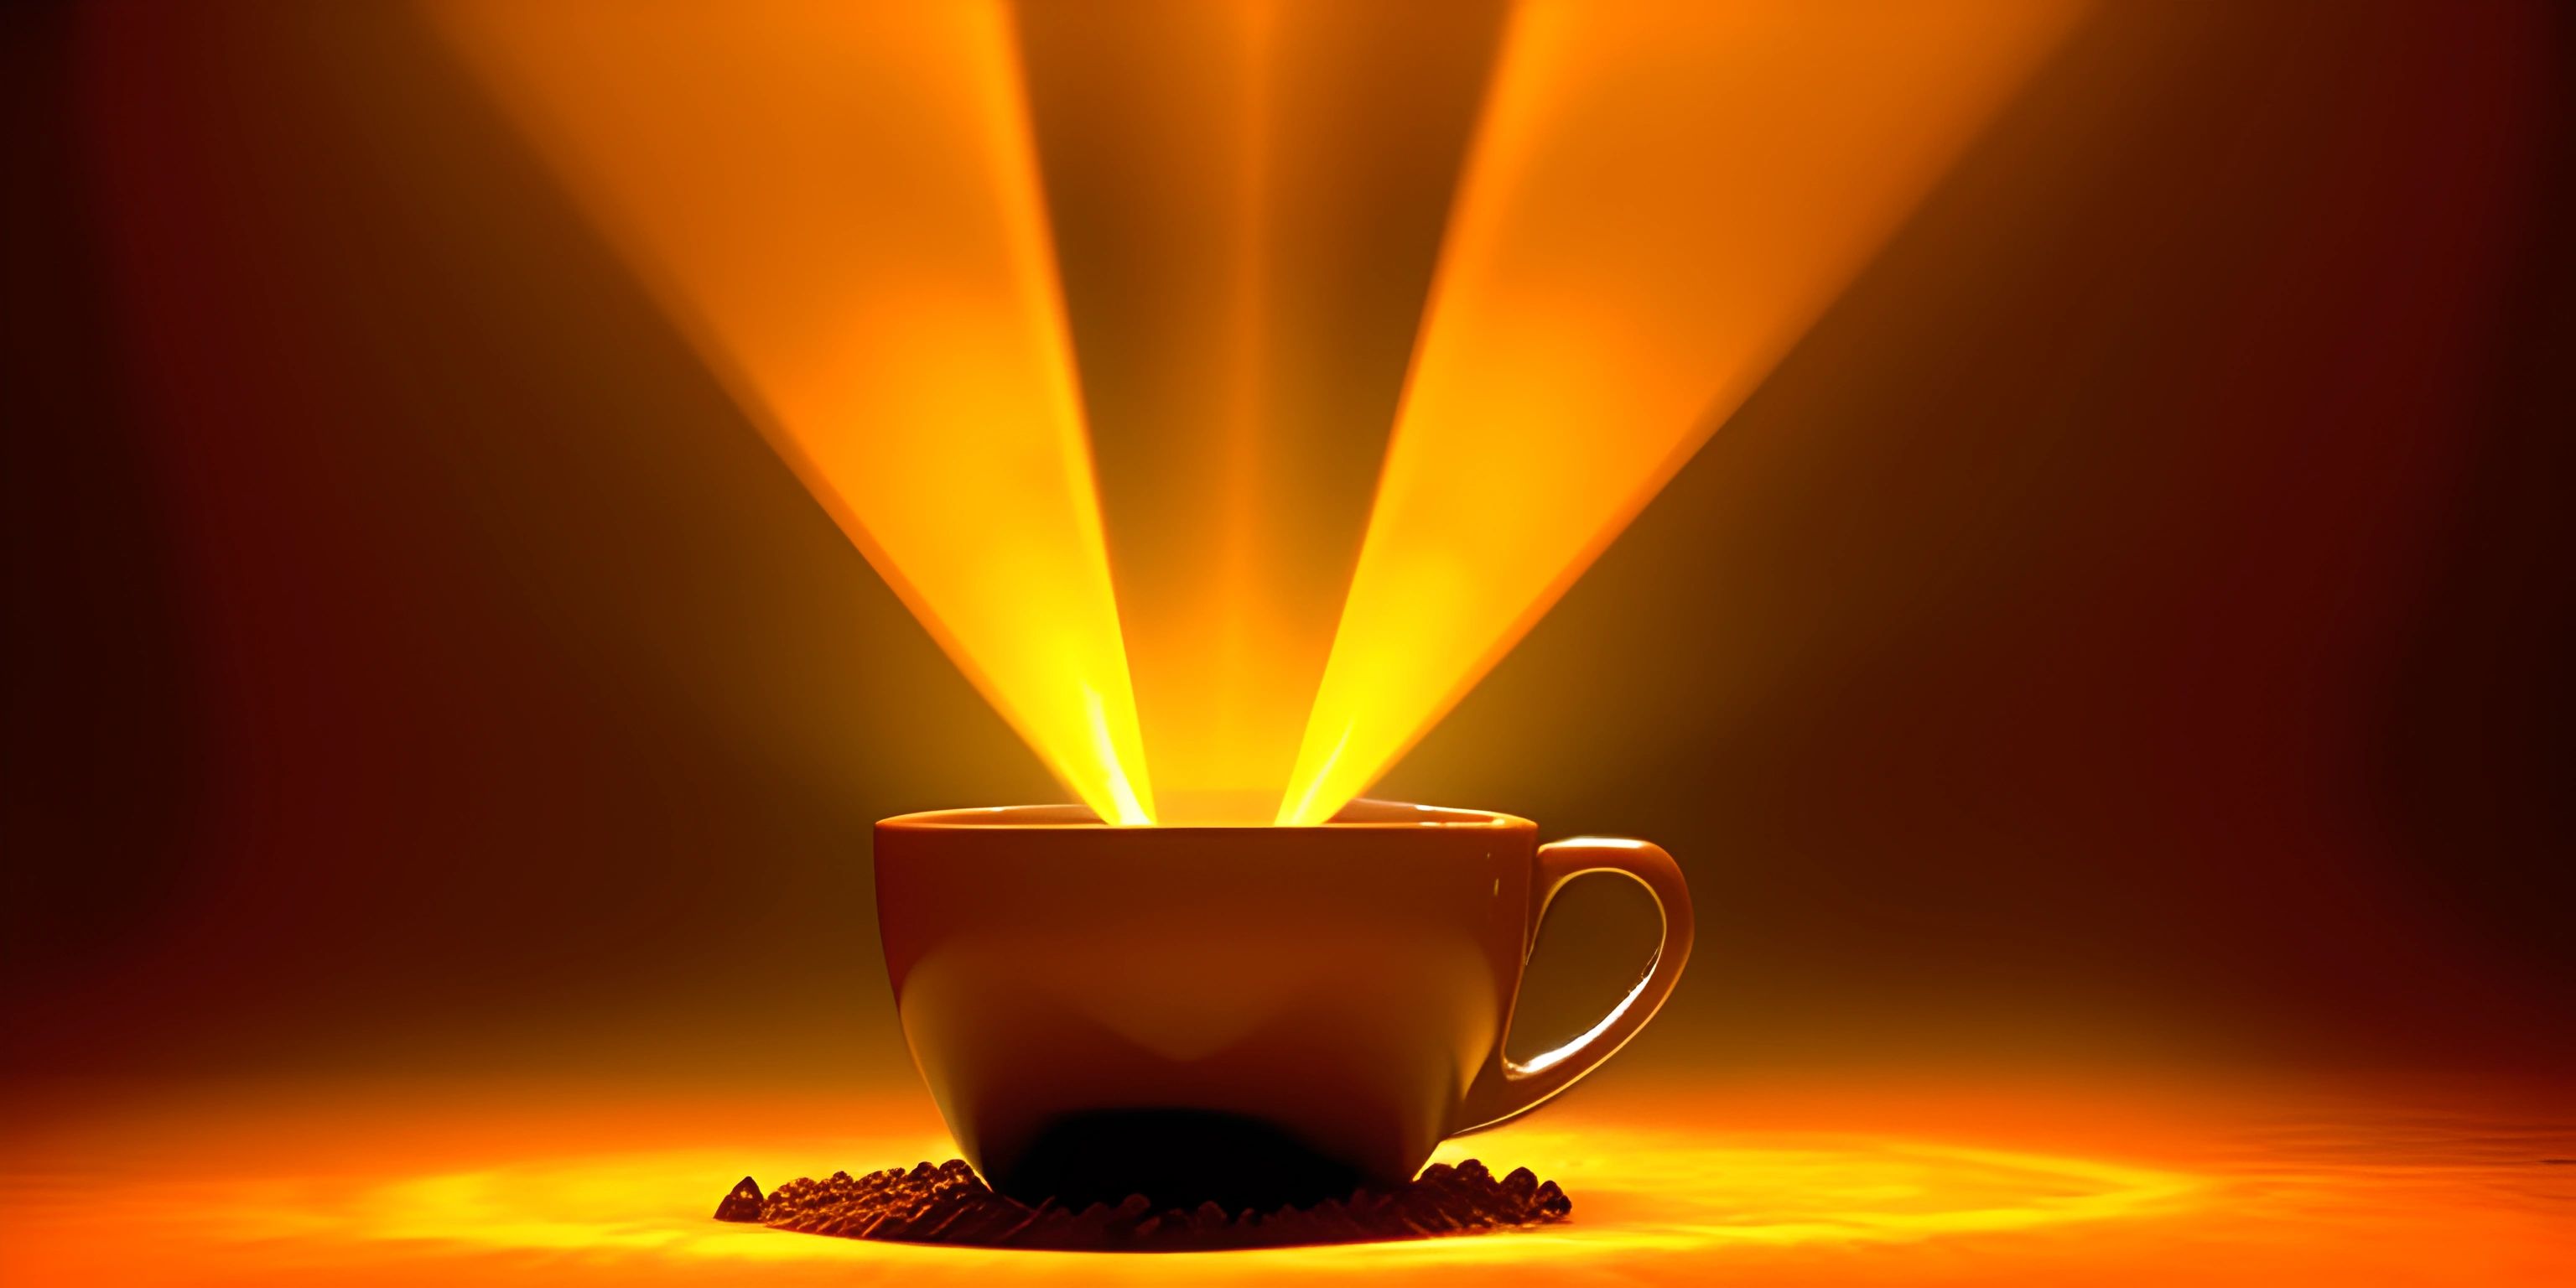 a cup with tea on a table with some yellow lights behind it, and coffee beans